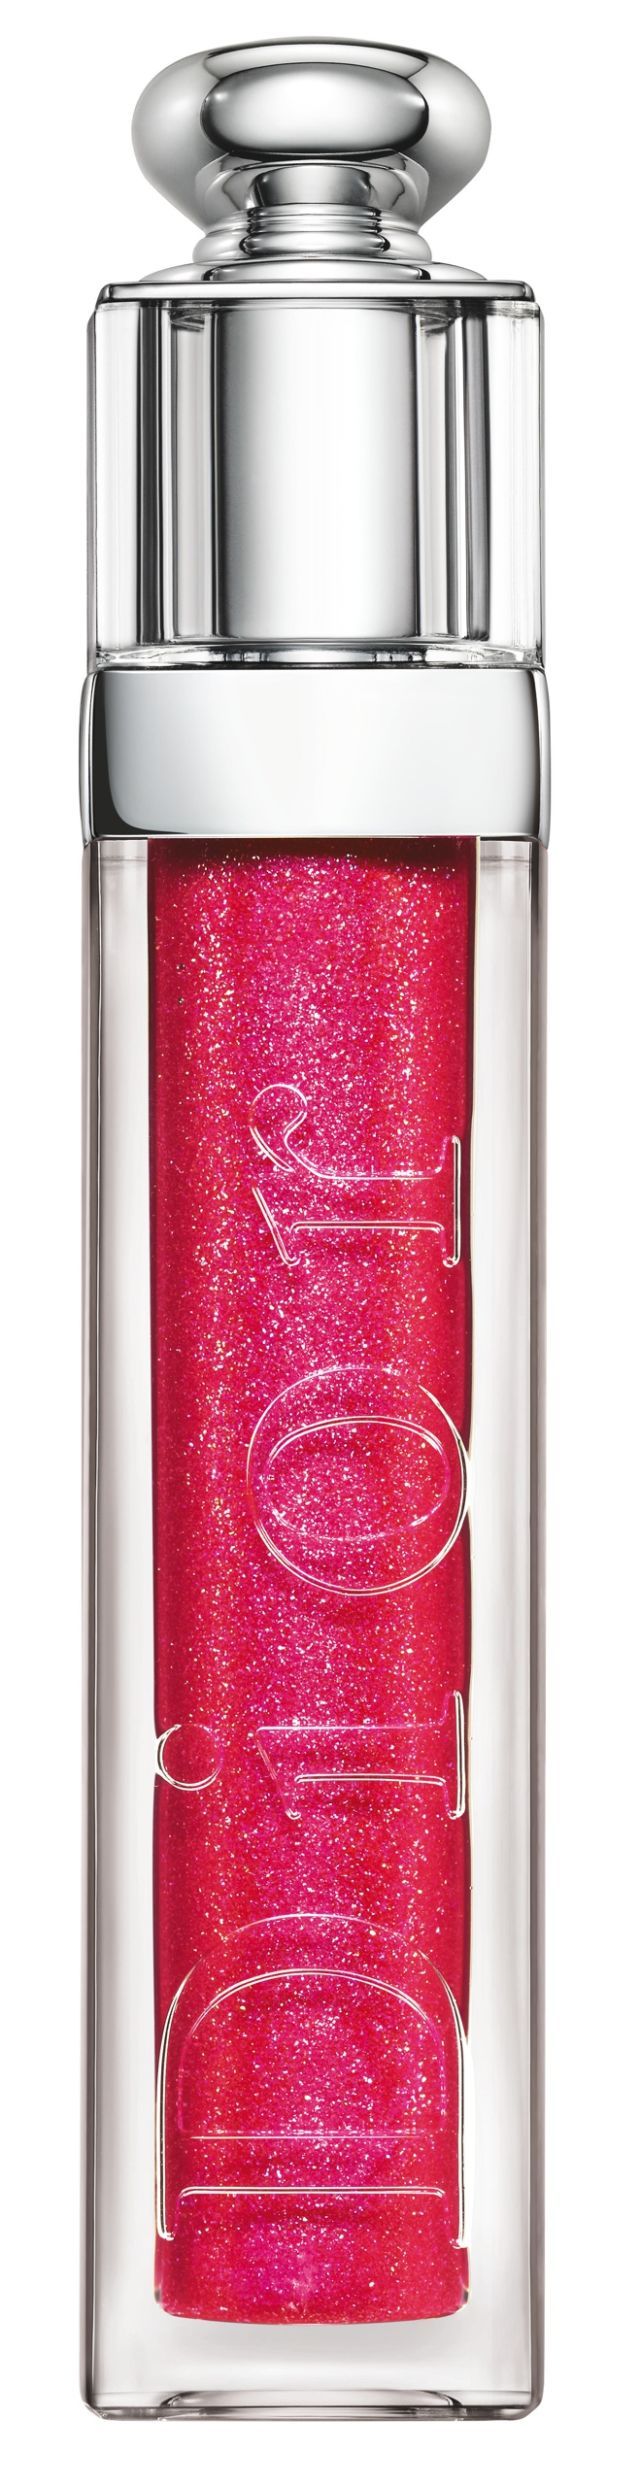 Red, Pink, Material property, Lip gloss, Cosmetics, Gloss, Glitter, Cylinder, 